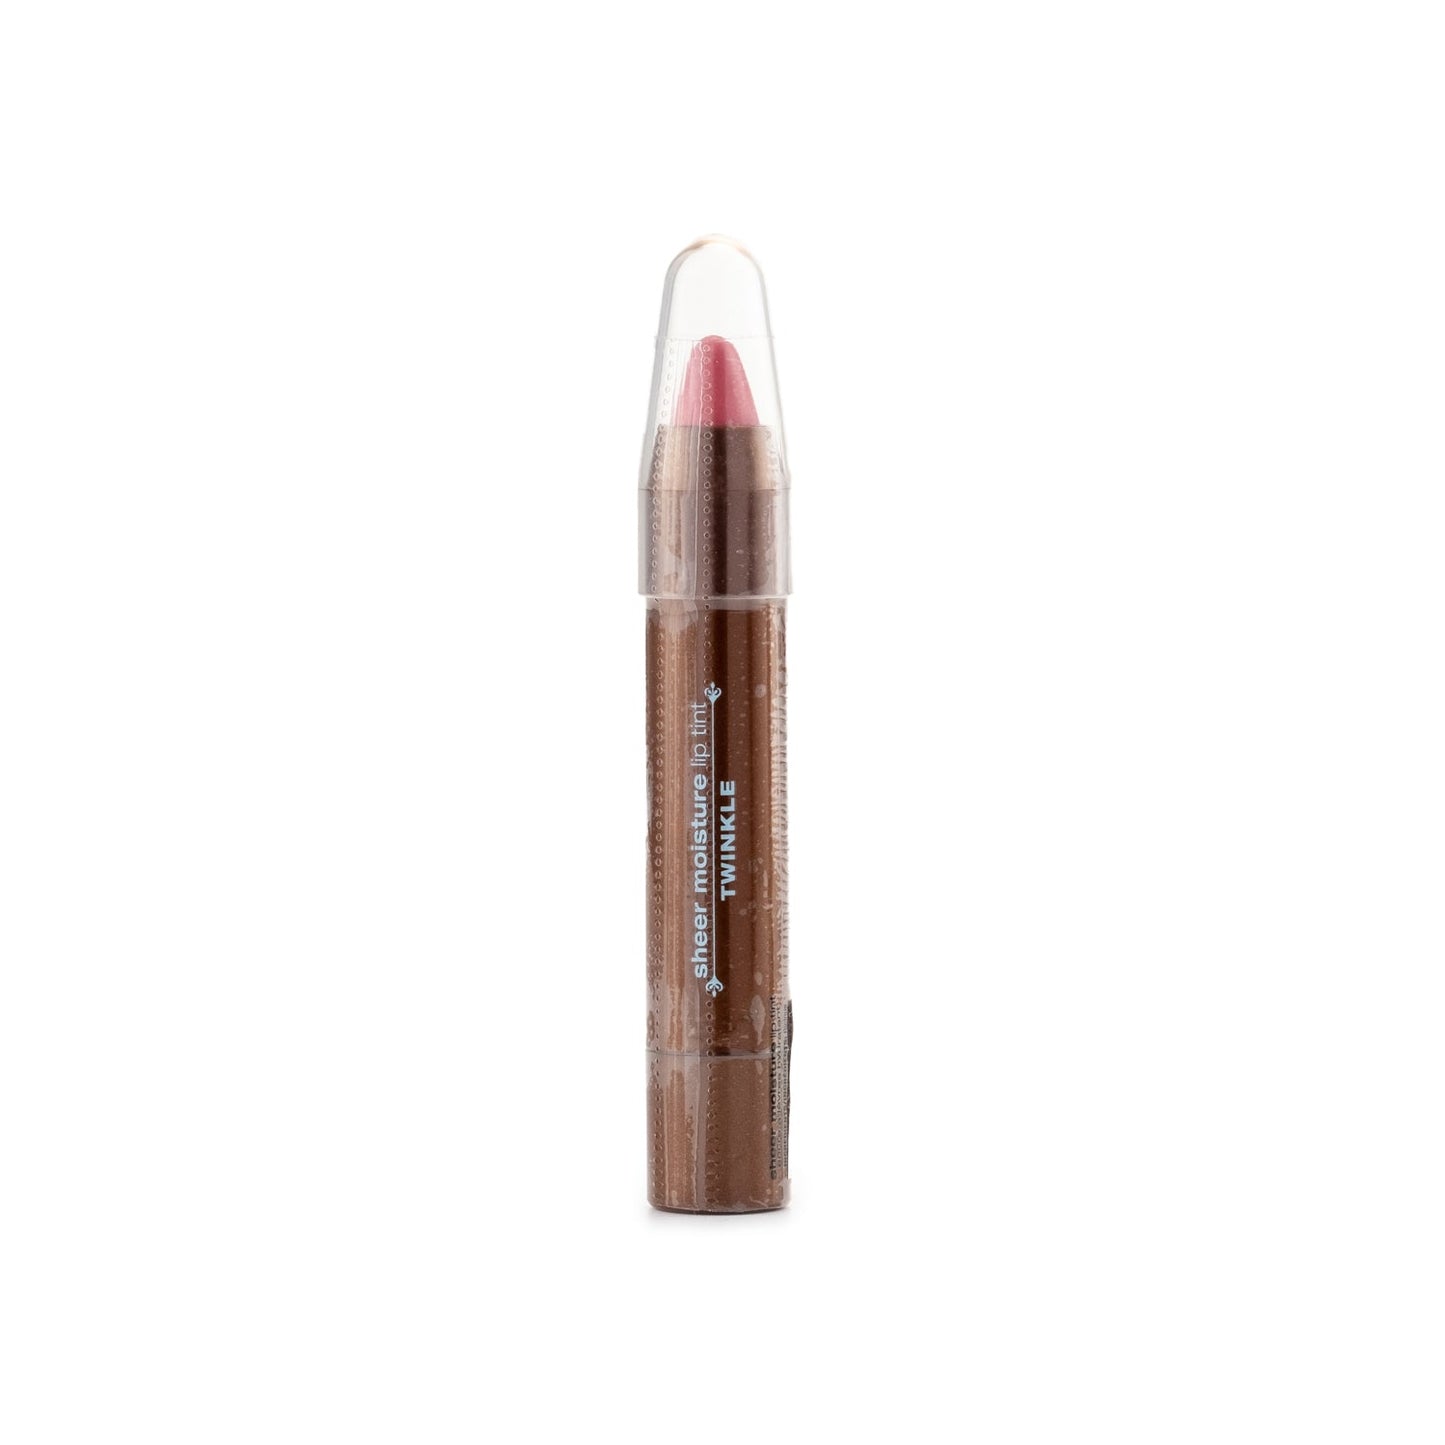 Mineral Fusion Sheer Moisture Lip Tint, Twinkle